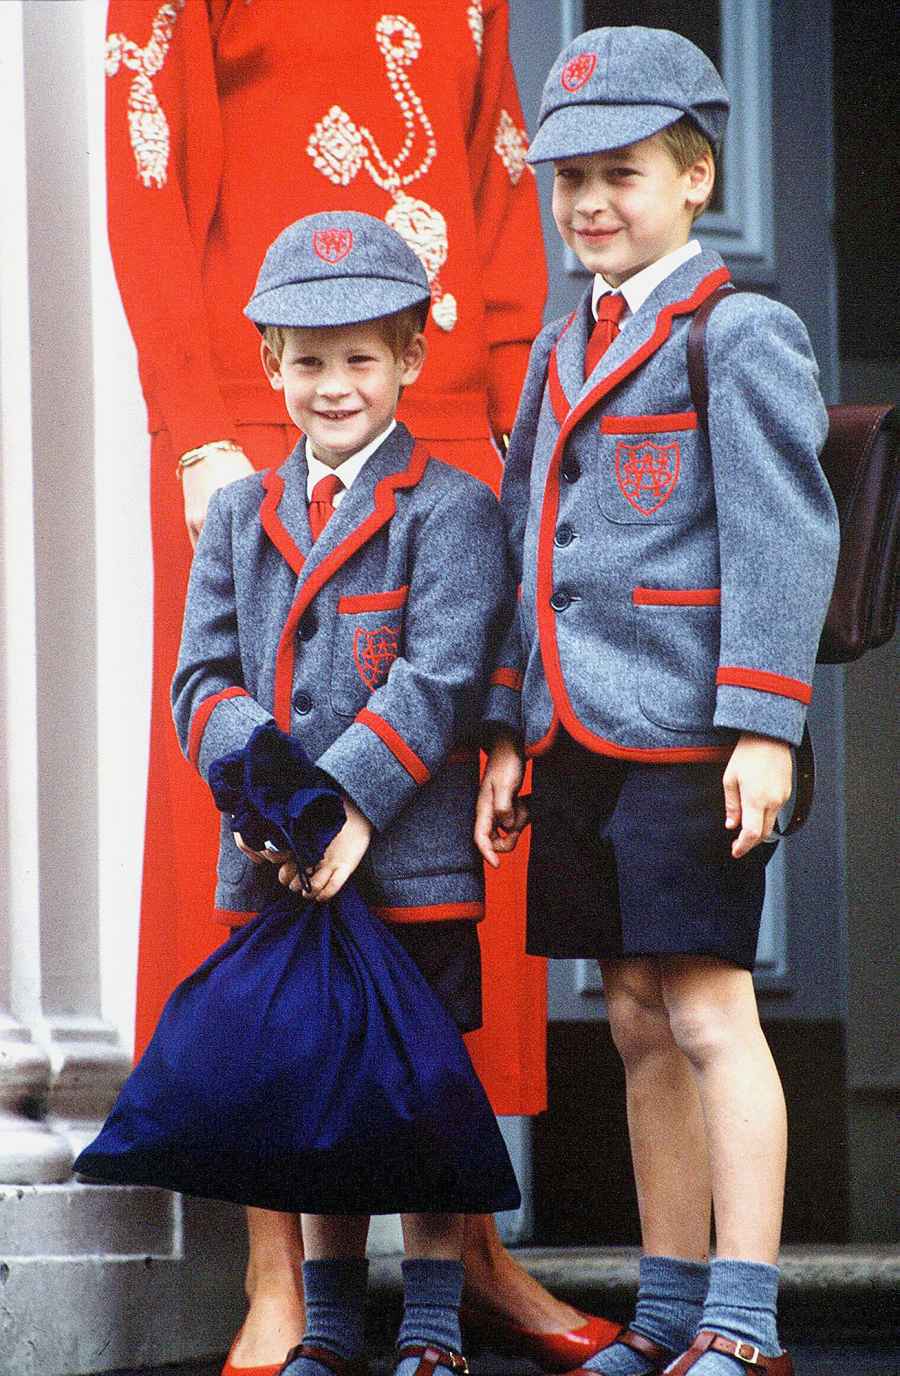 Princess Diana taking Prince William and Henry Harry to Wetherby school in London in 1989